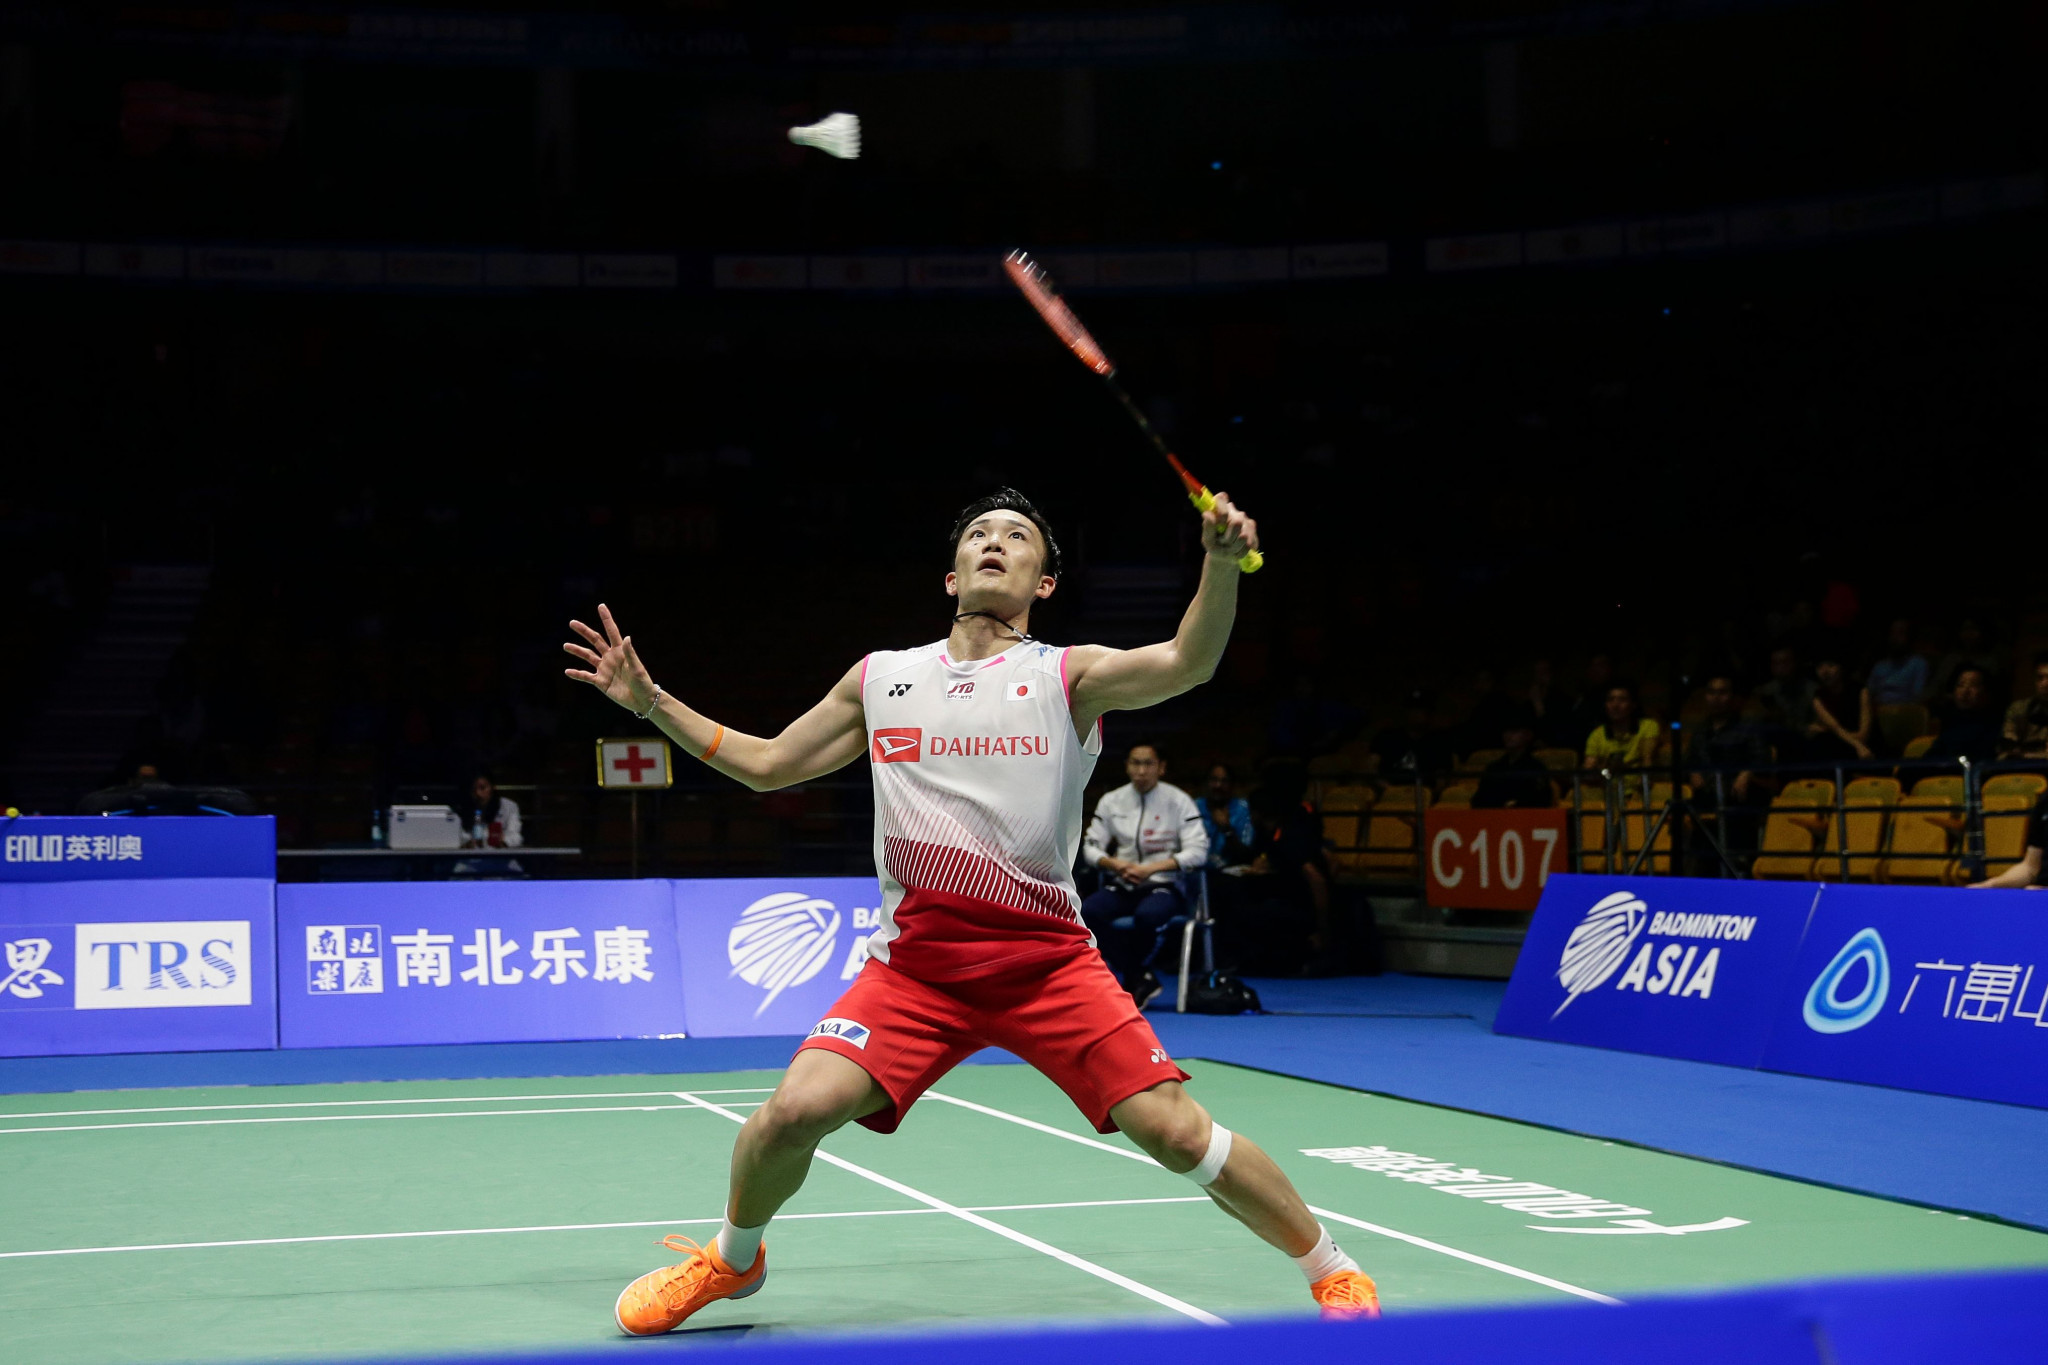 World champion Kento Momota retained his men's singles title in Wuhan ©Getty Images